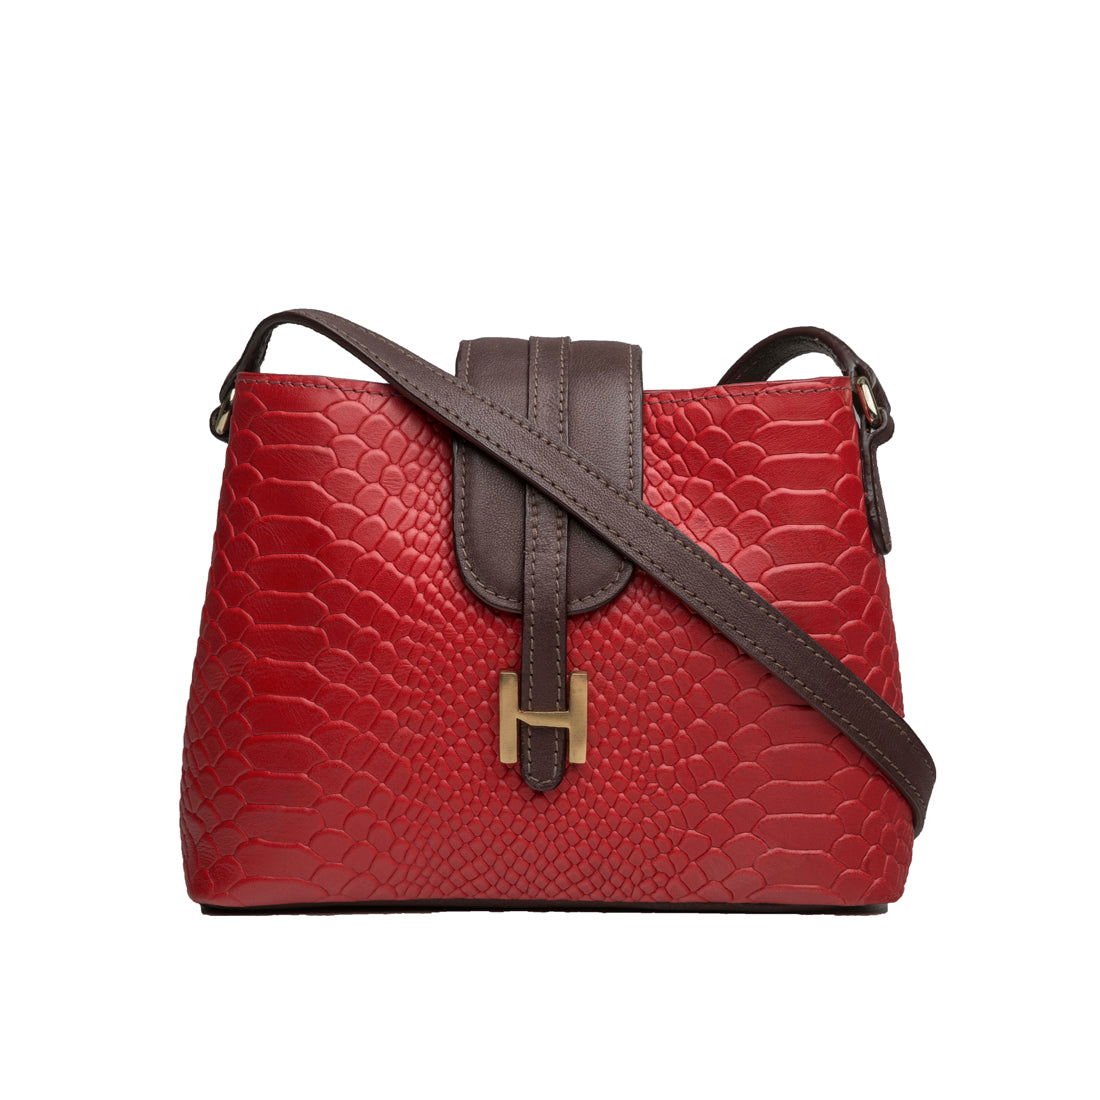 Latest Hidesign Laptop Bags arrivals - 16 products | FASHIOLA.in